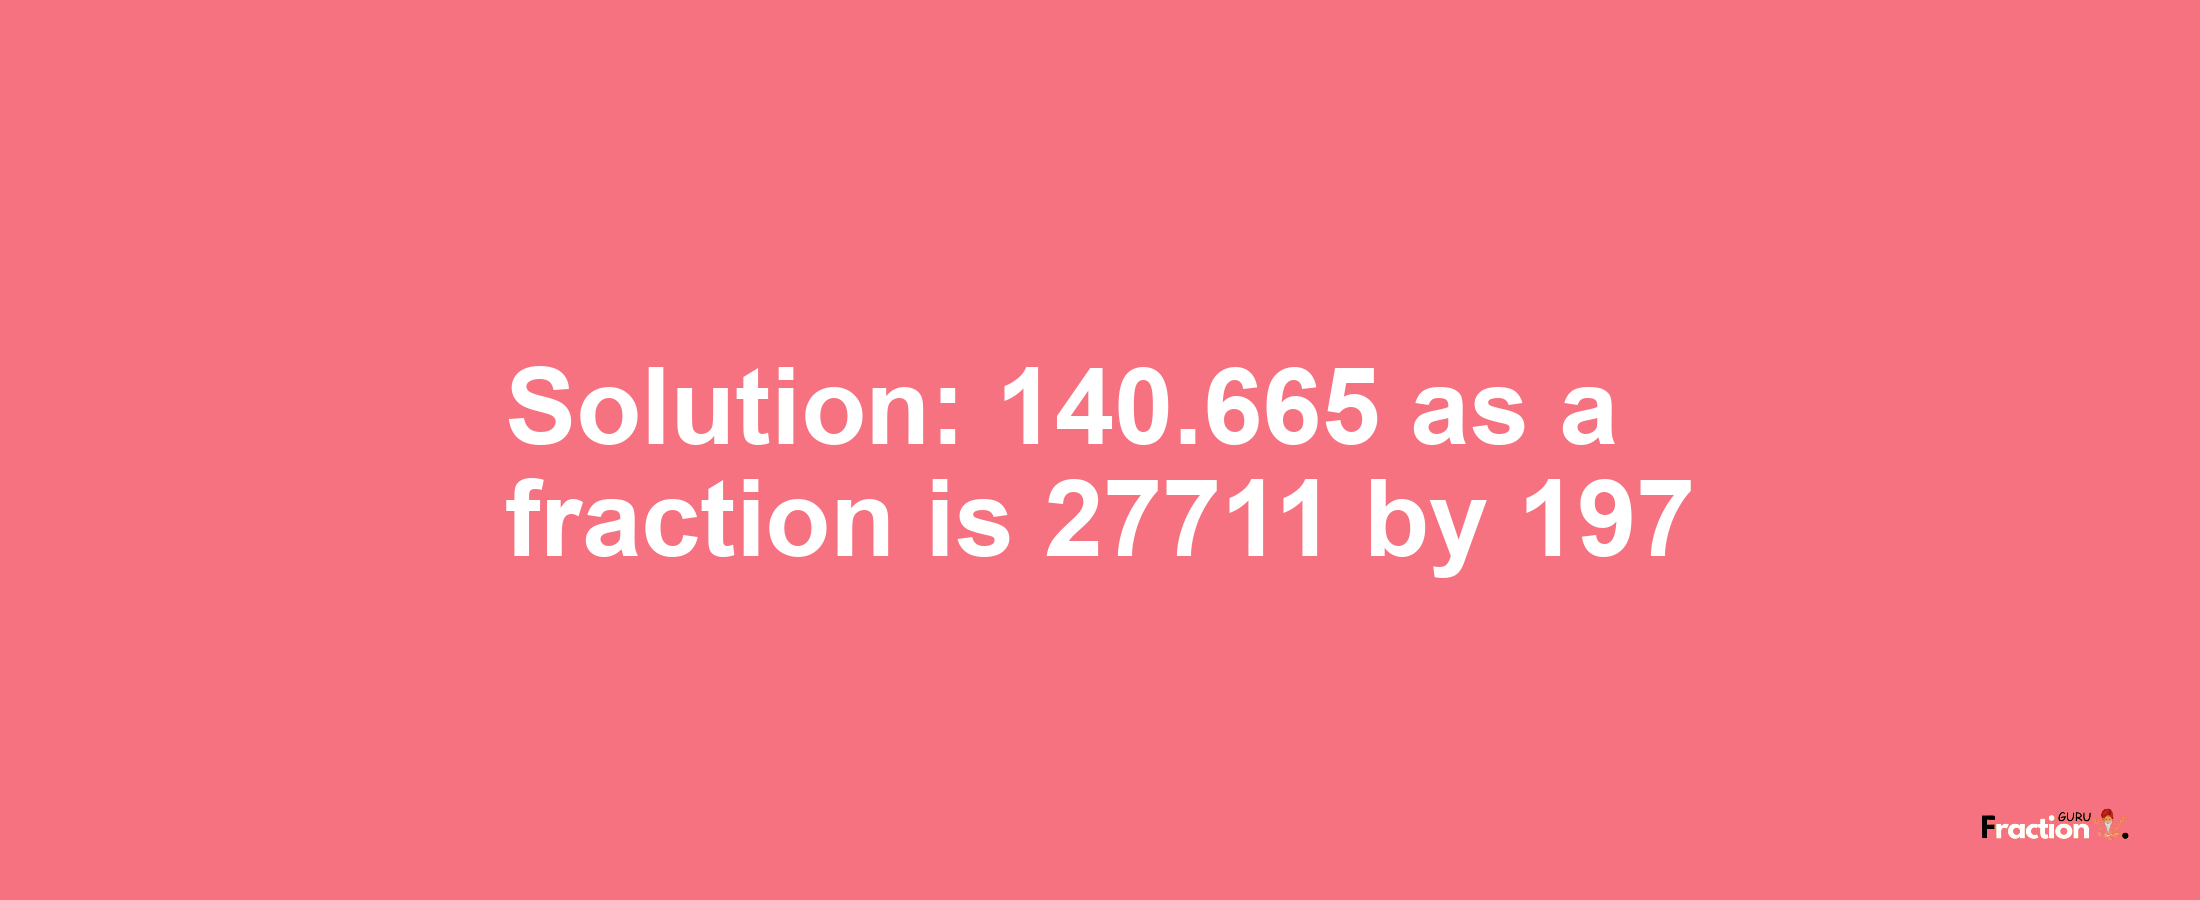 Solution:140.665 as a fraction is 27711/197